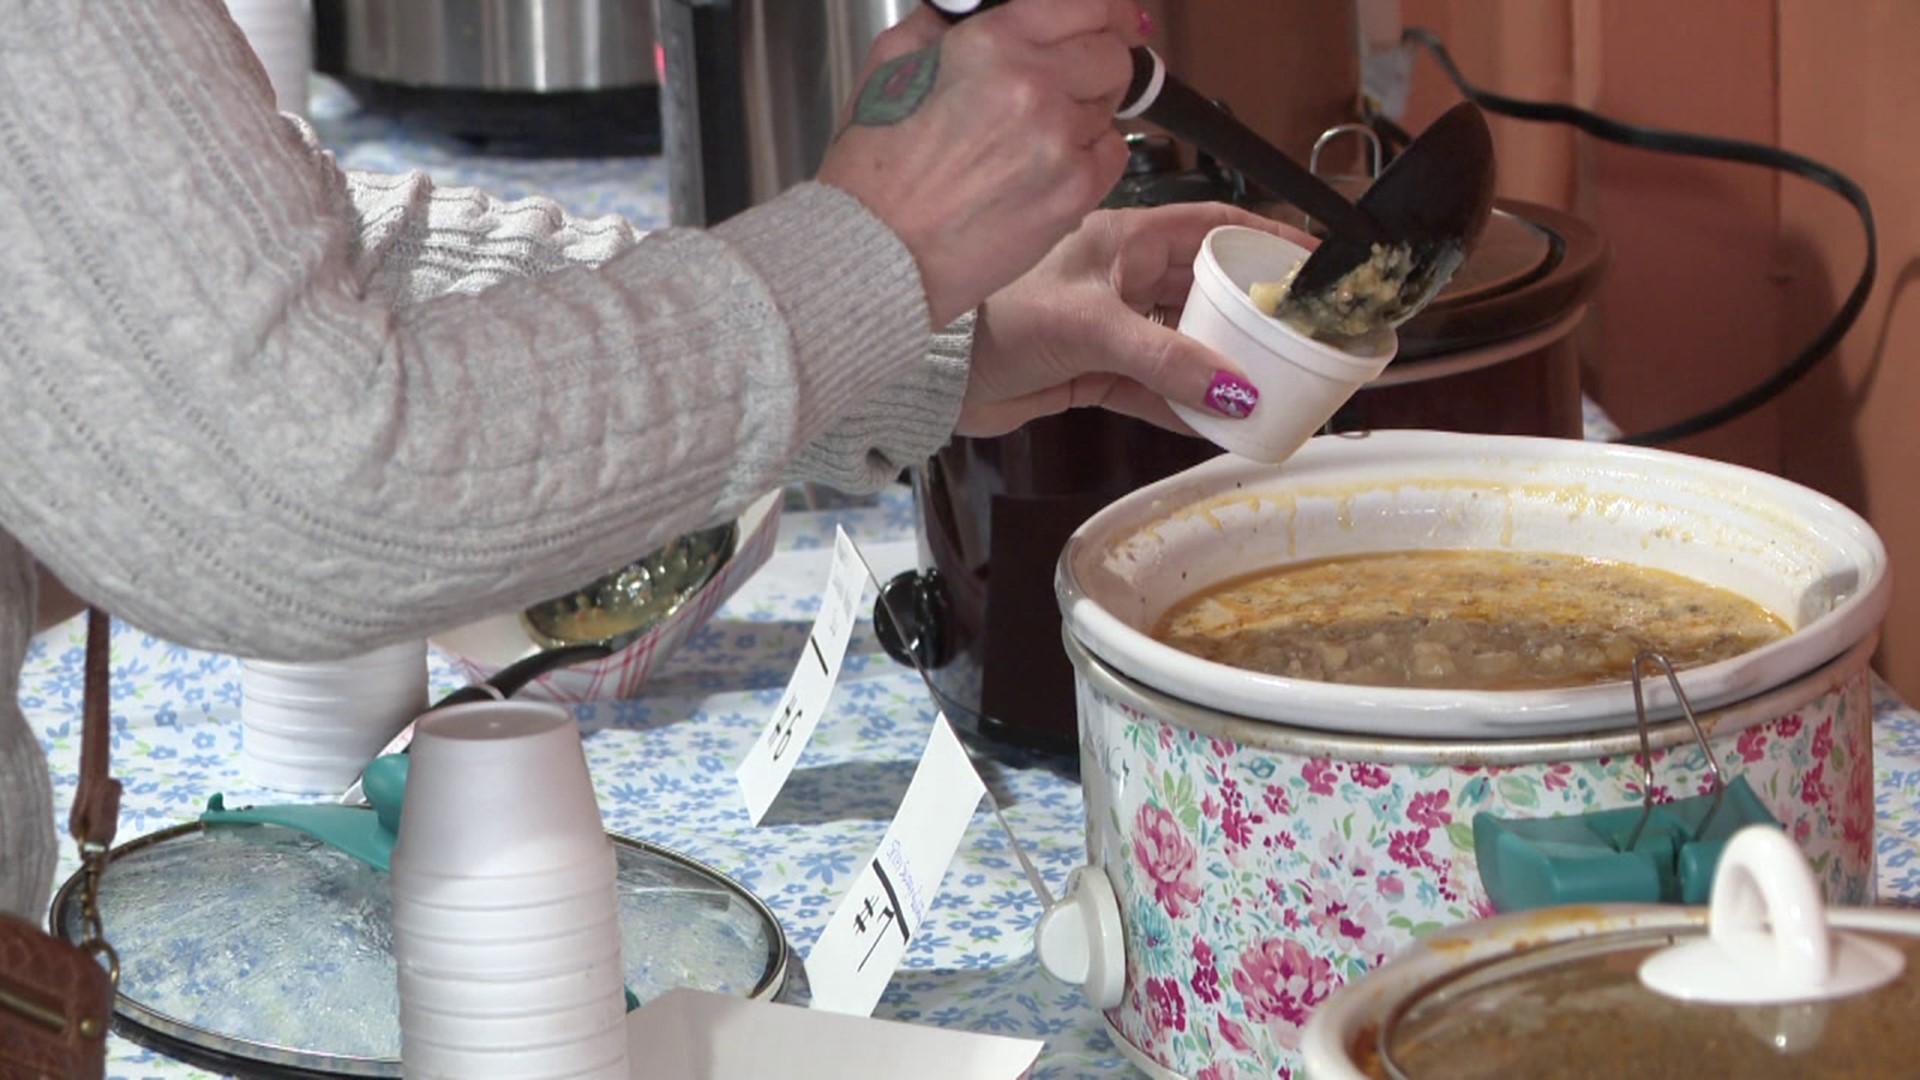 It was a perfect day to warm up with some soup in Susquehanna County.